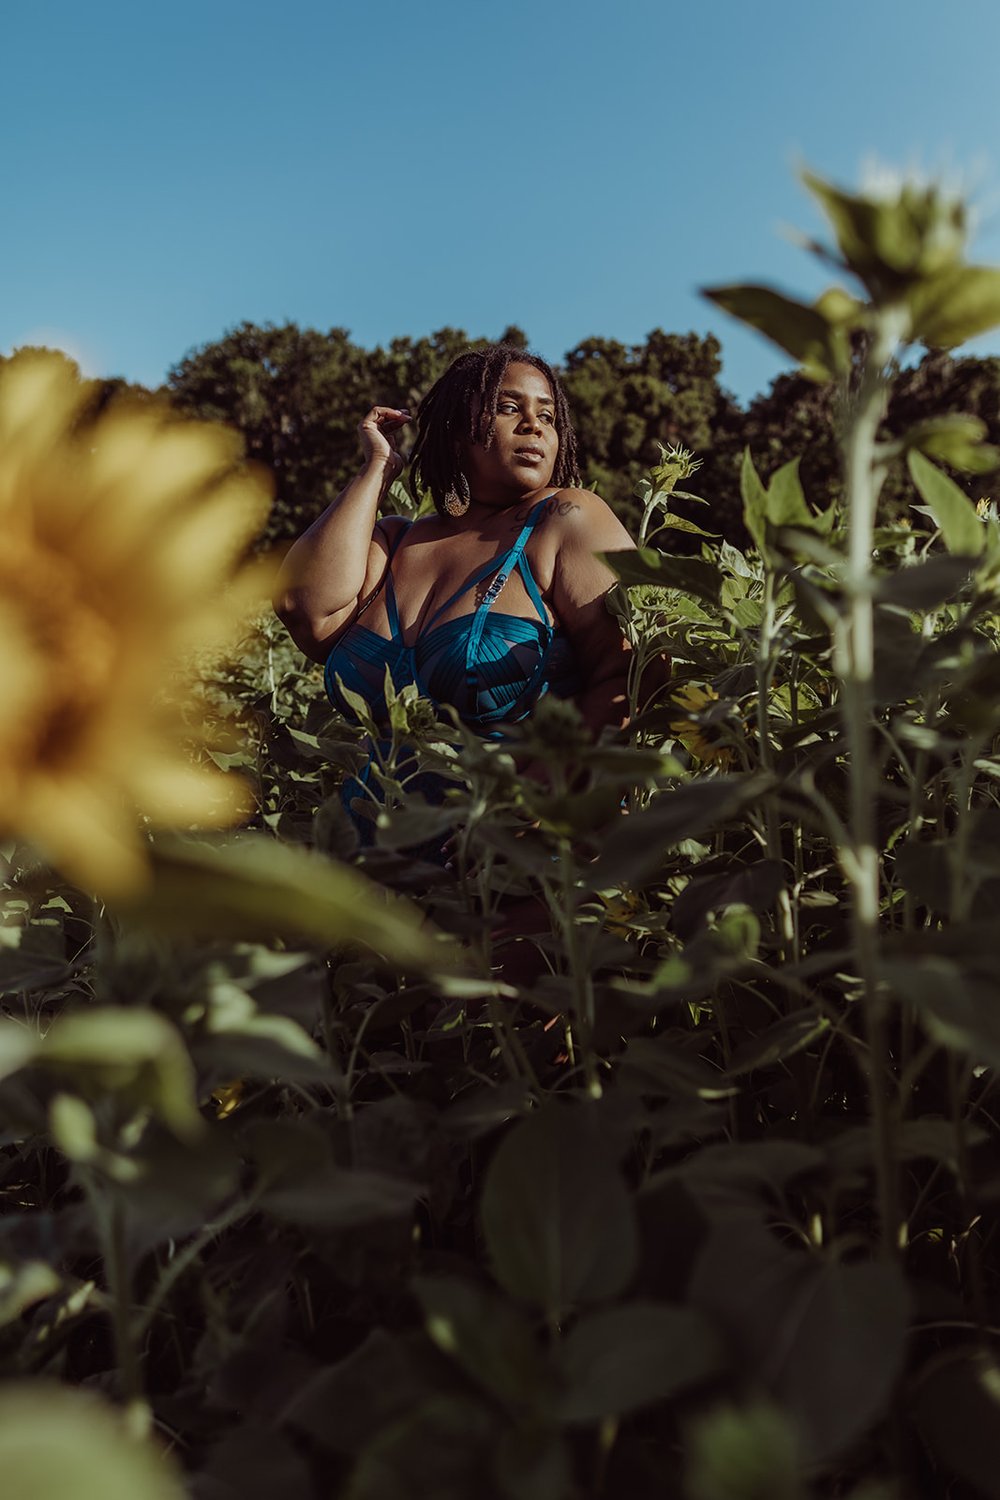  Black woman in lingerie is covered by sunflower stems in an outdoor photoshoot while standing among the stalks 